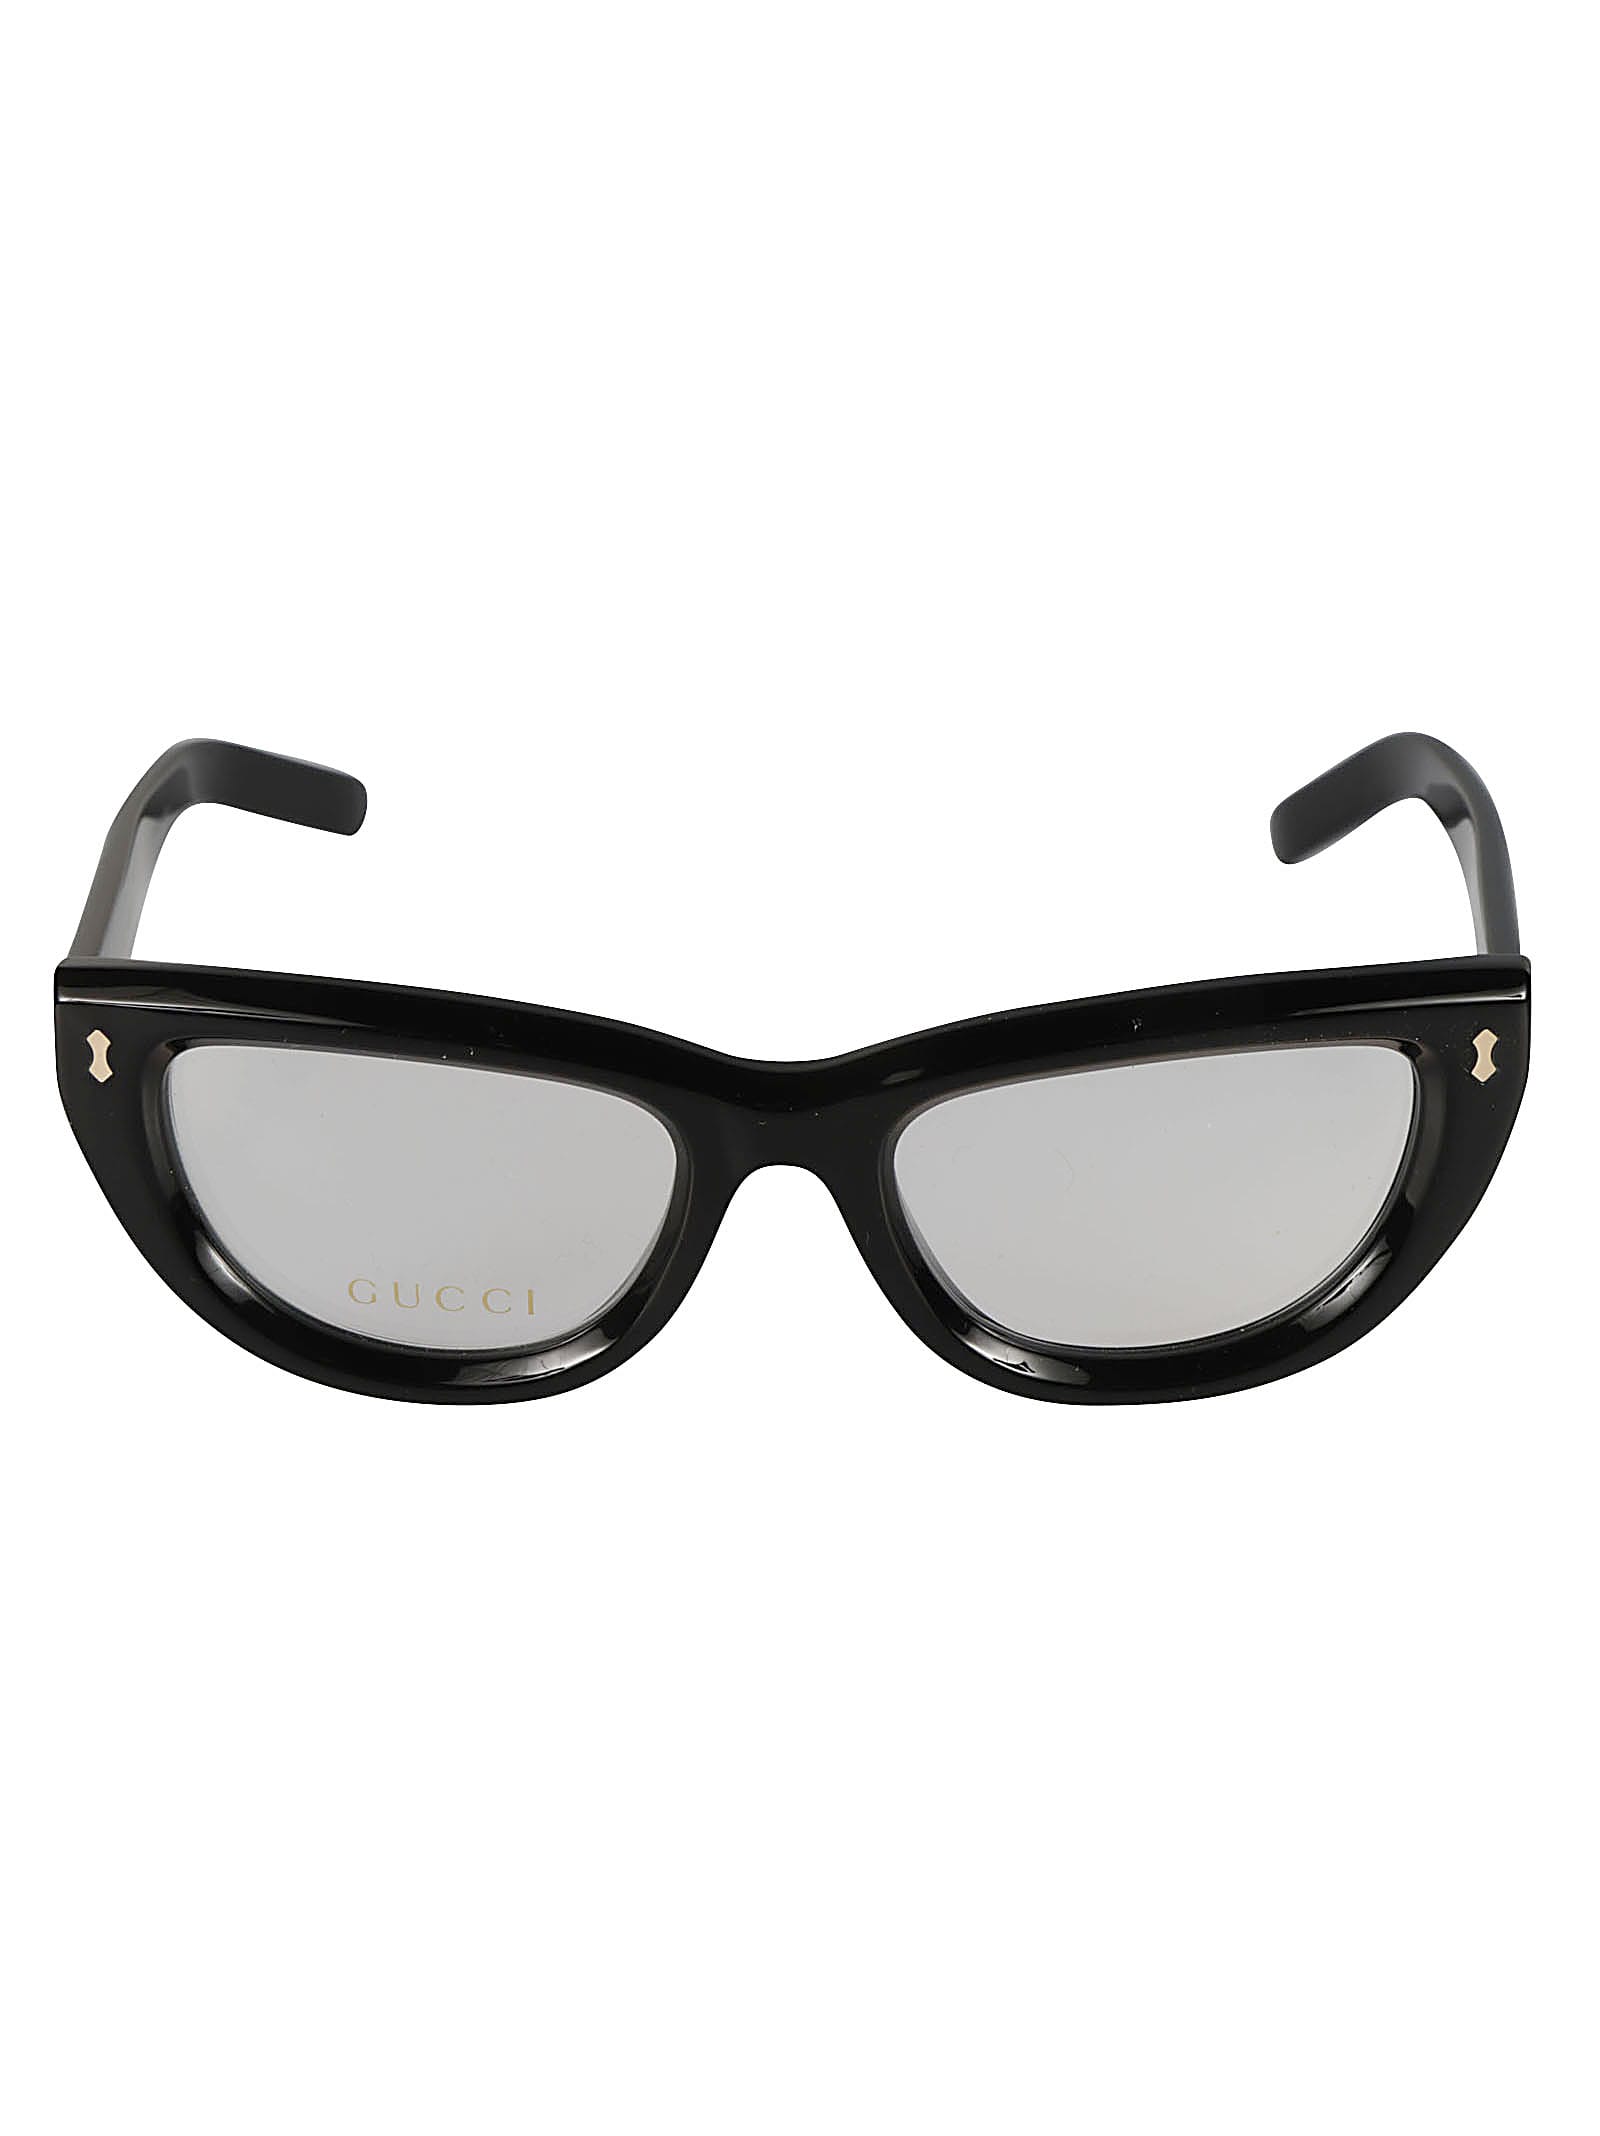 GUCCI CAT EYE THICK FRAME